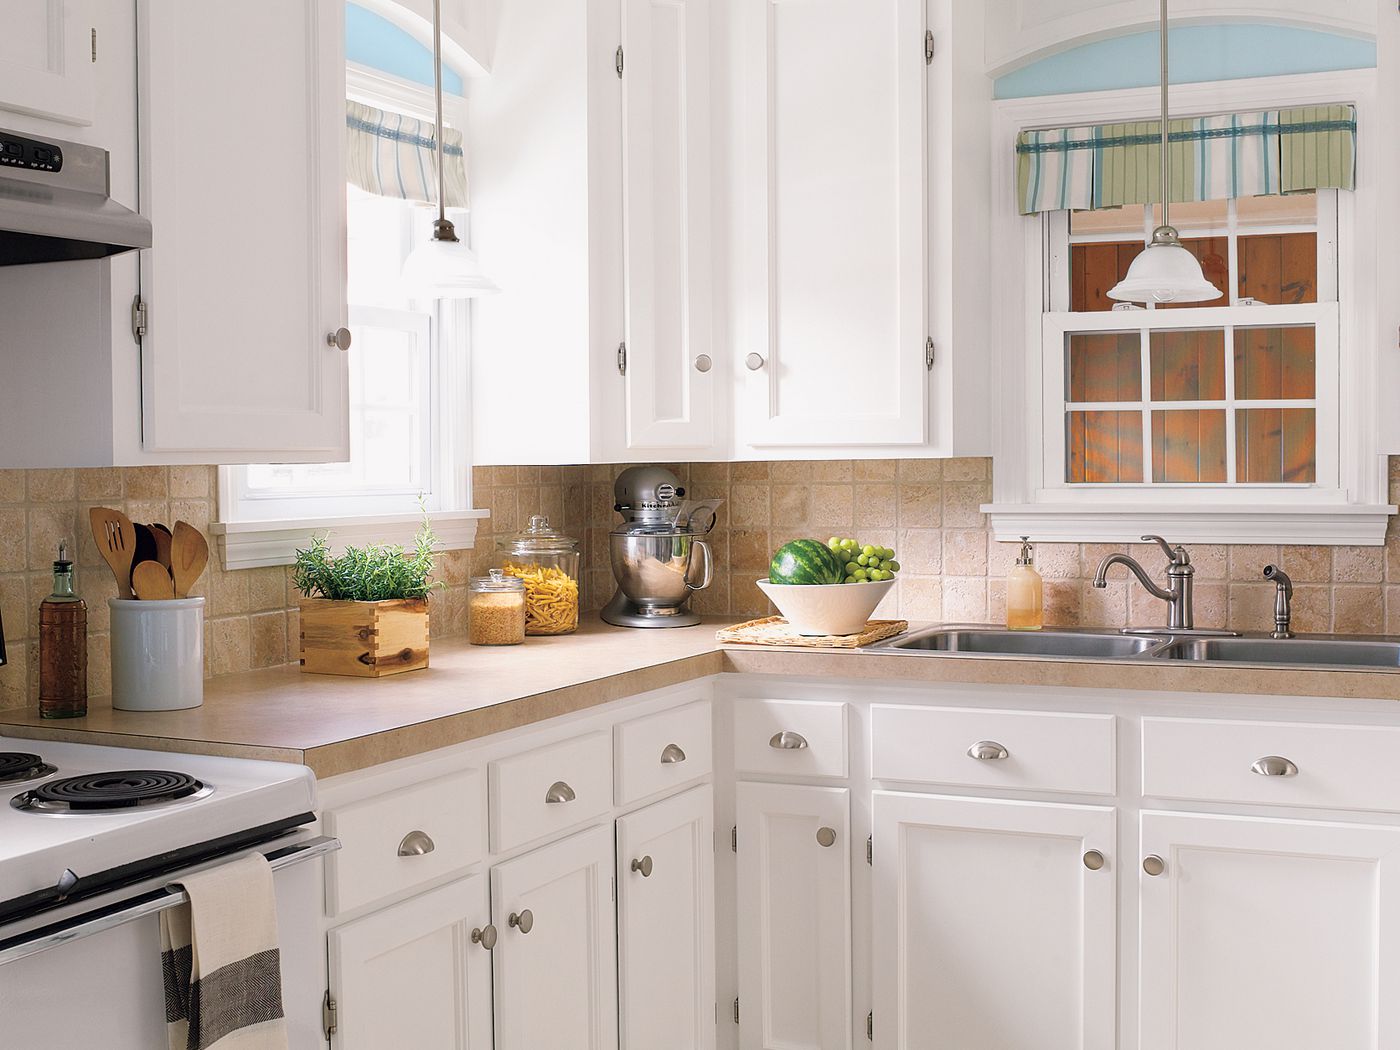 Top 18 Budget Kitchen and Bath Remodels   This Old House